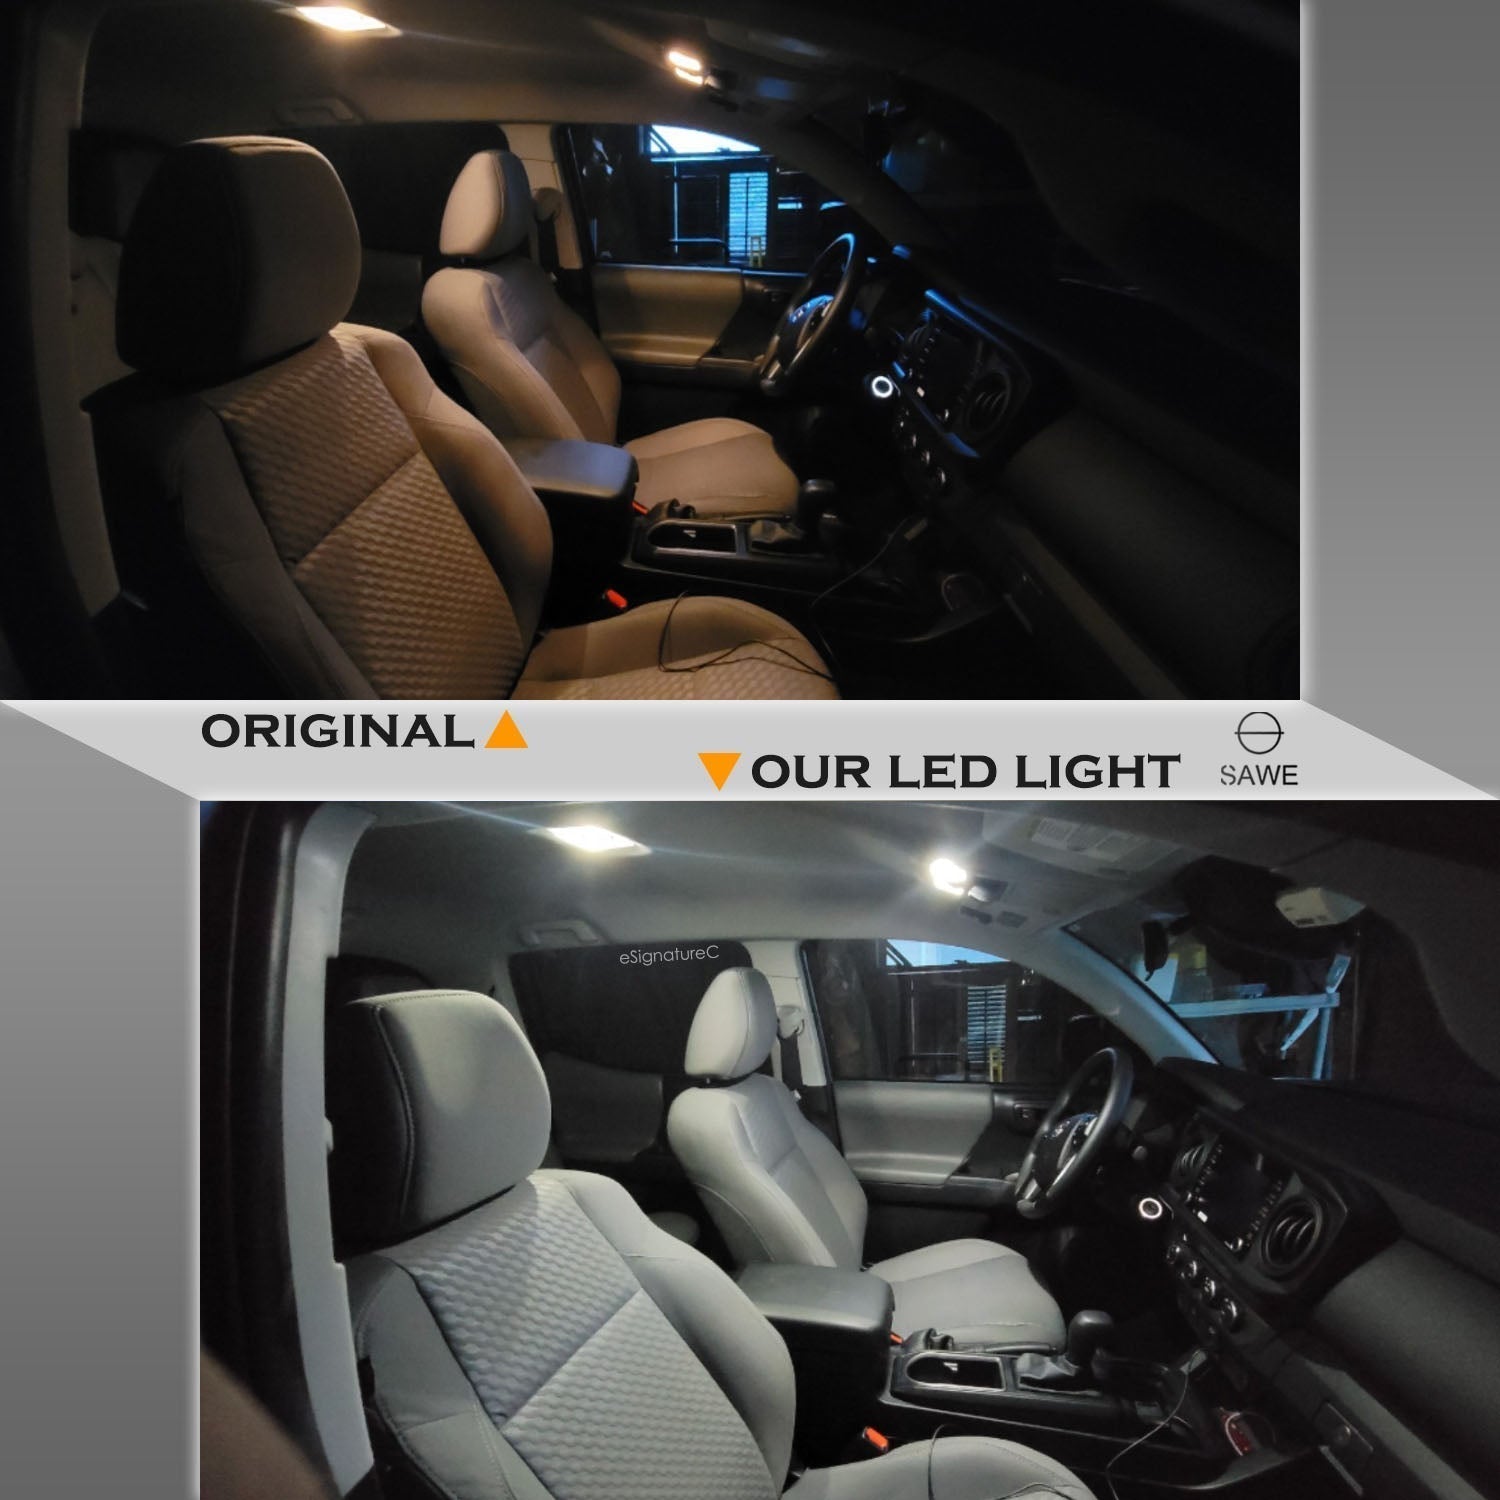 For Ford Escape Interior LED Lights - Dome & Map Light Bulbs Package Kit for 2001 - 2007 - White